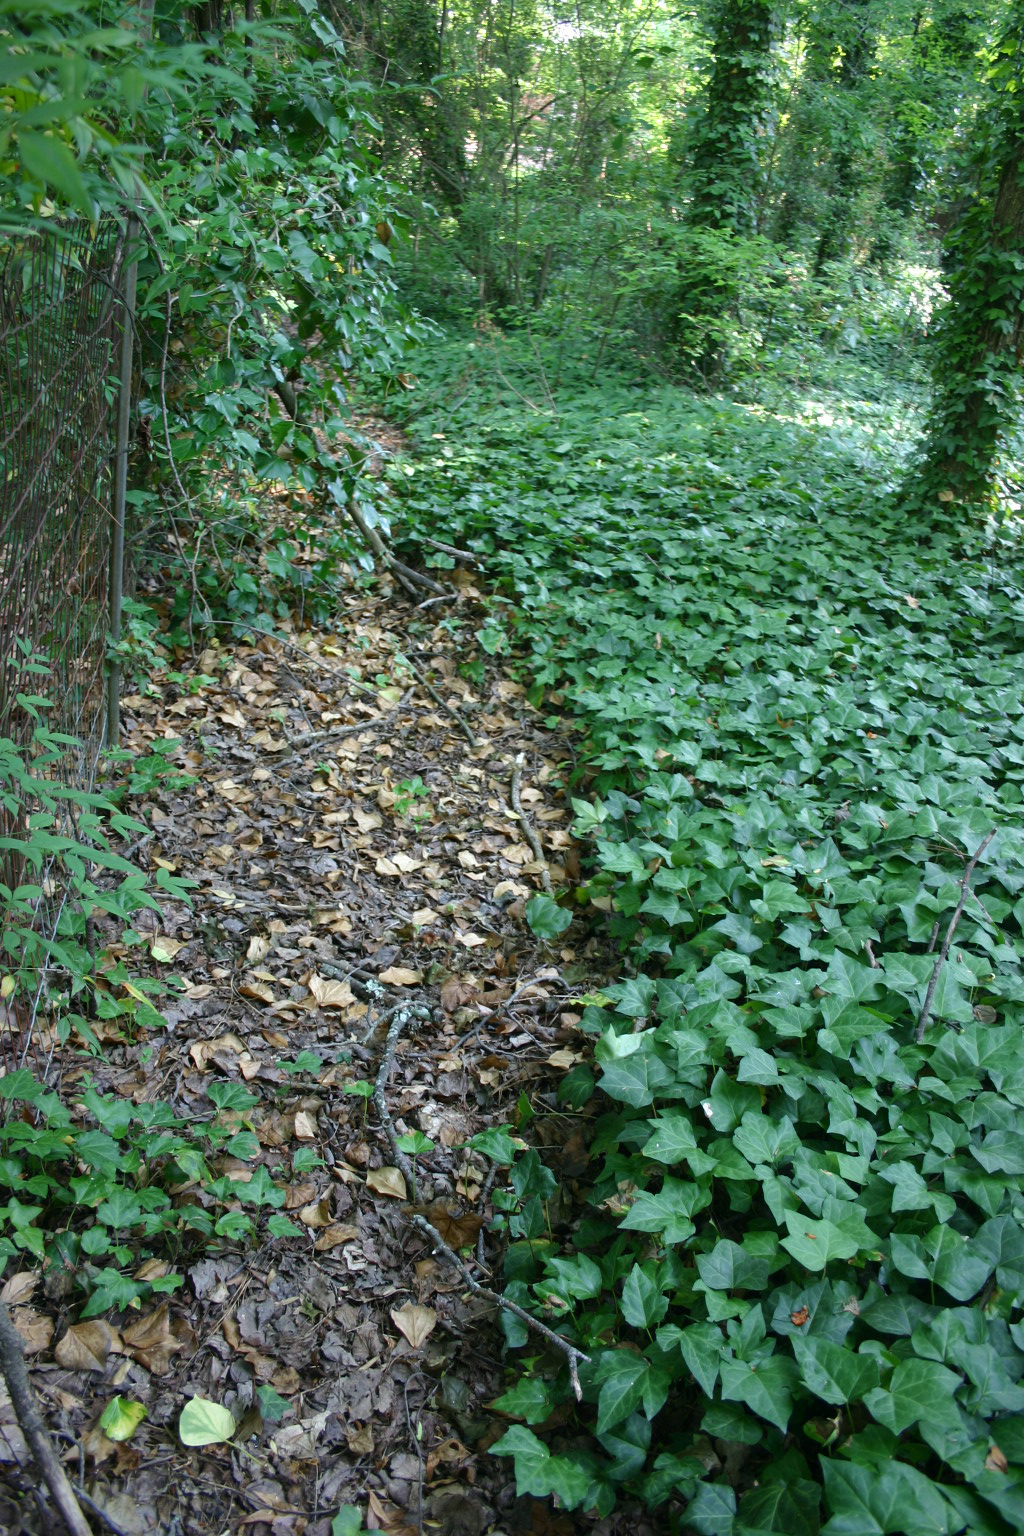 English ivy controlled with glyphosate